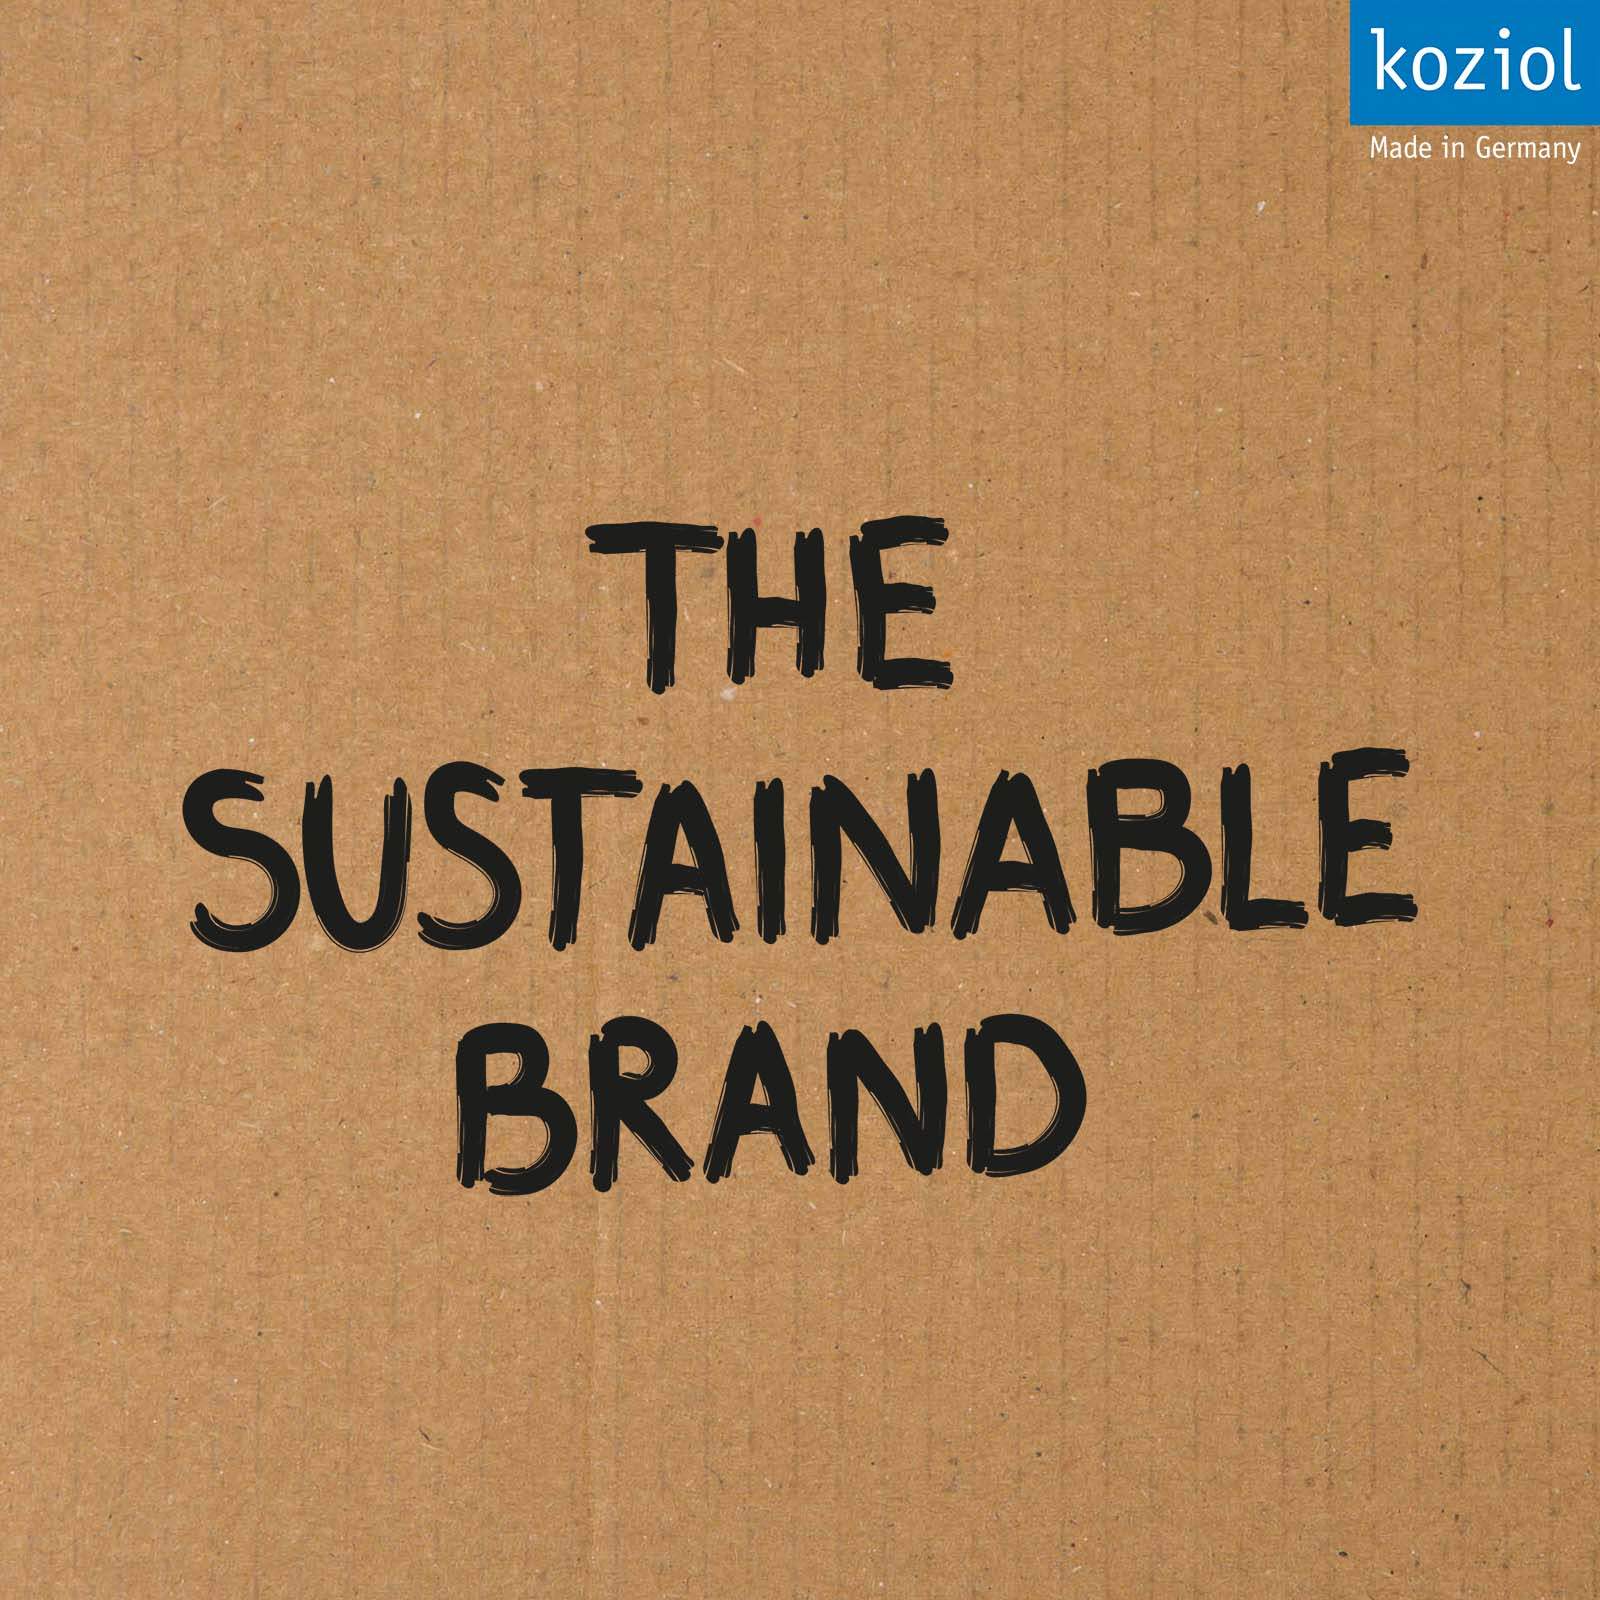 The sustainable brand